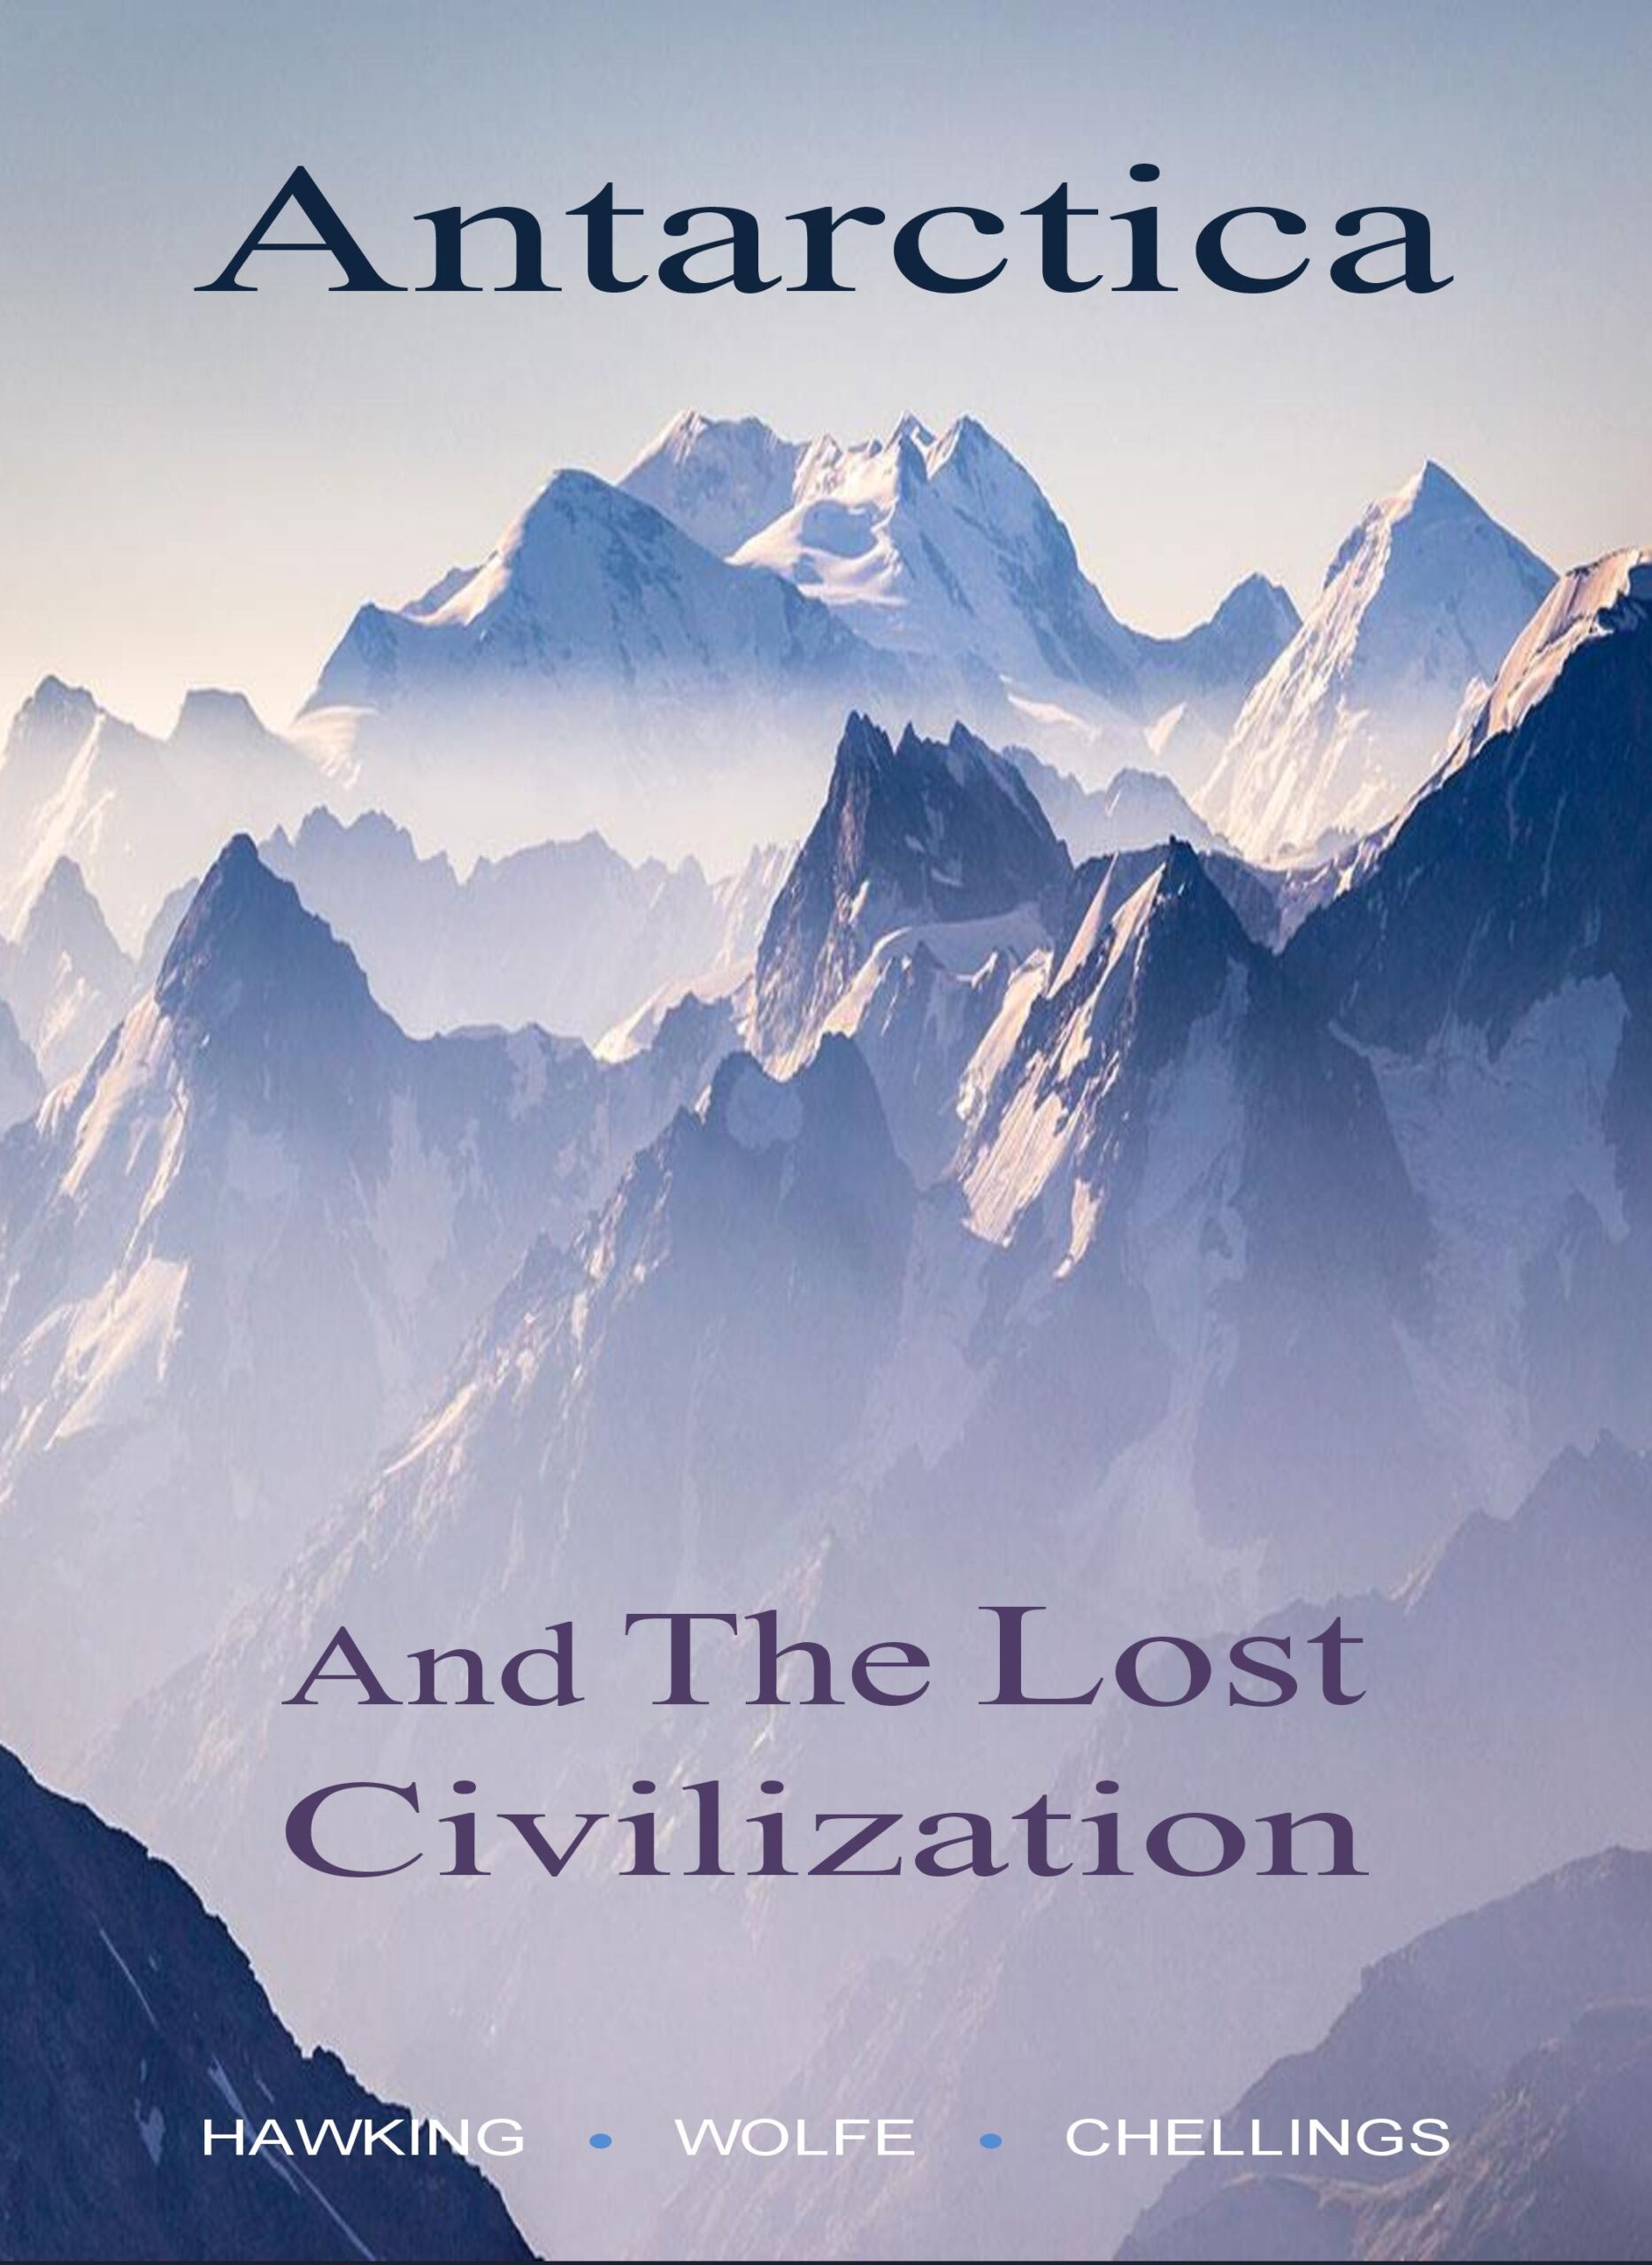 FREE: Antarctica and The Lost Civilization by M.G. Hawking, Jenna Wolfe Ph.D.